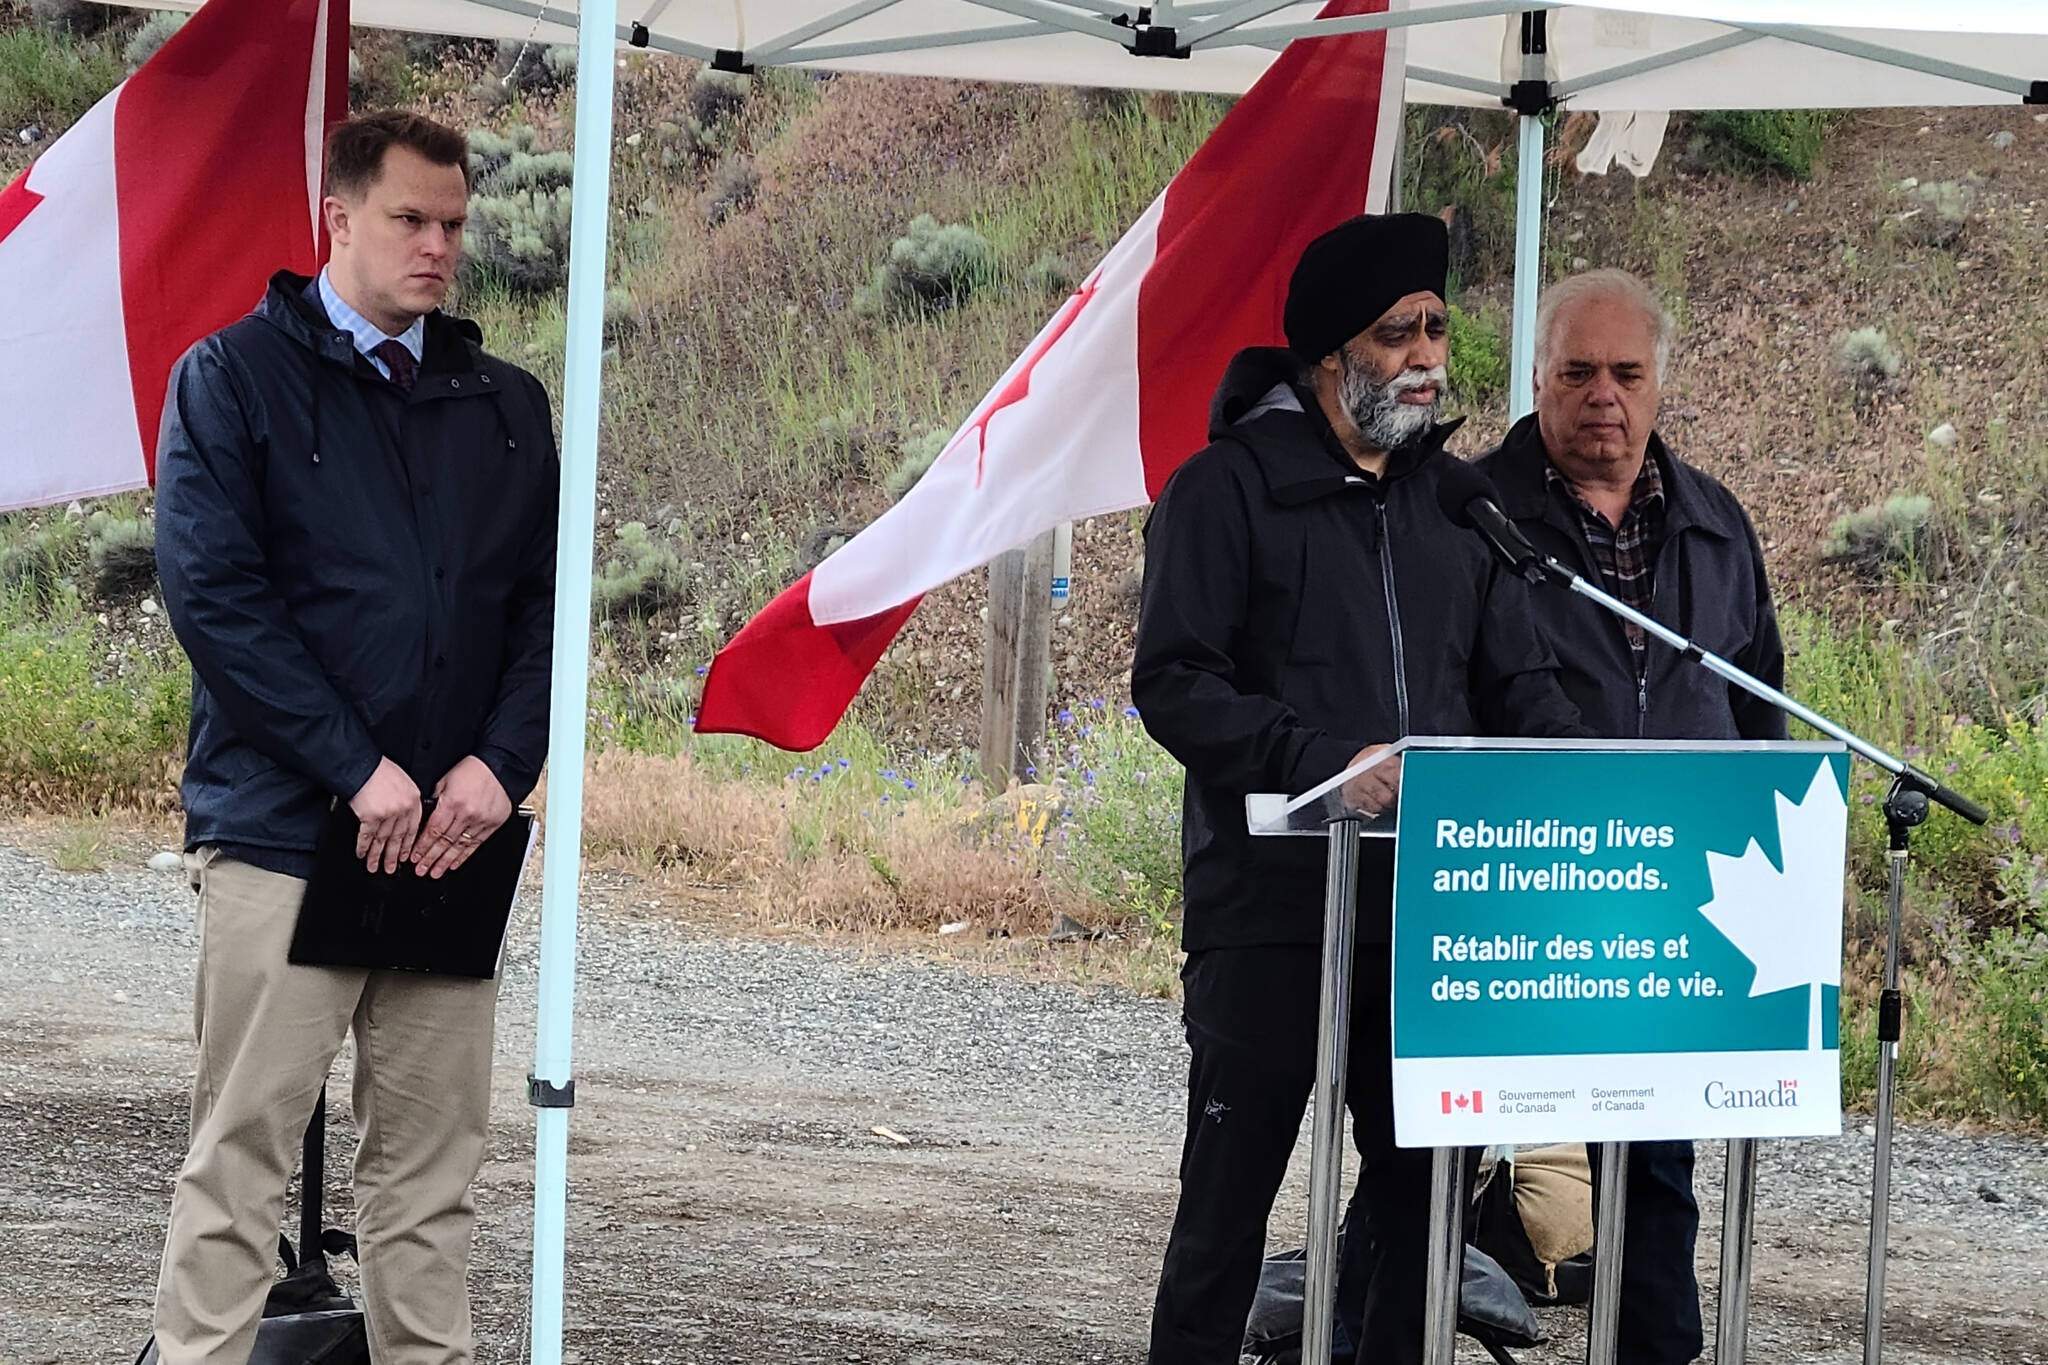 Minister of International Development Harjit Sajjan (centre) announced $77 million in federal funding toward rebuilding efforts in Lytton after the community was almost entirely destroyed by wildfires. MP Brad Vis (left) and Lytton Mayor Jan Polderman (right) attended the announcement. (Photo/Diana Campbell)